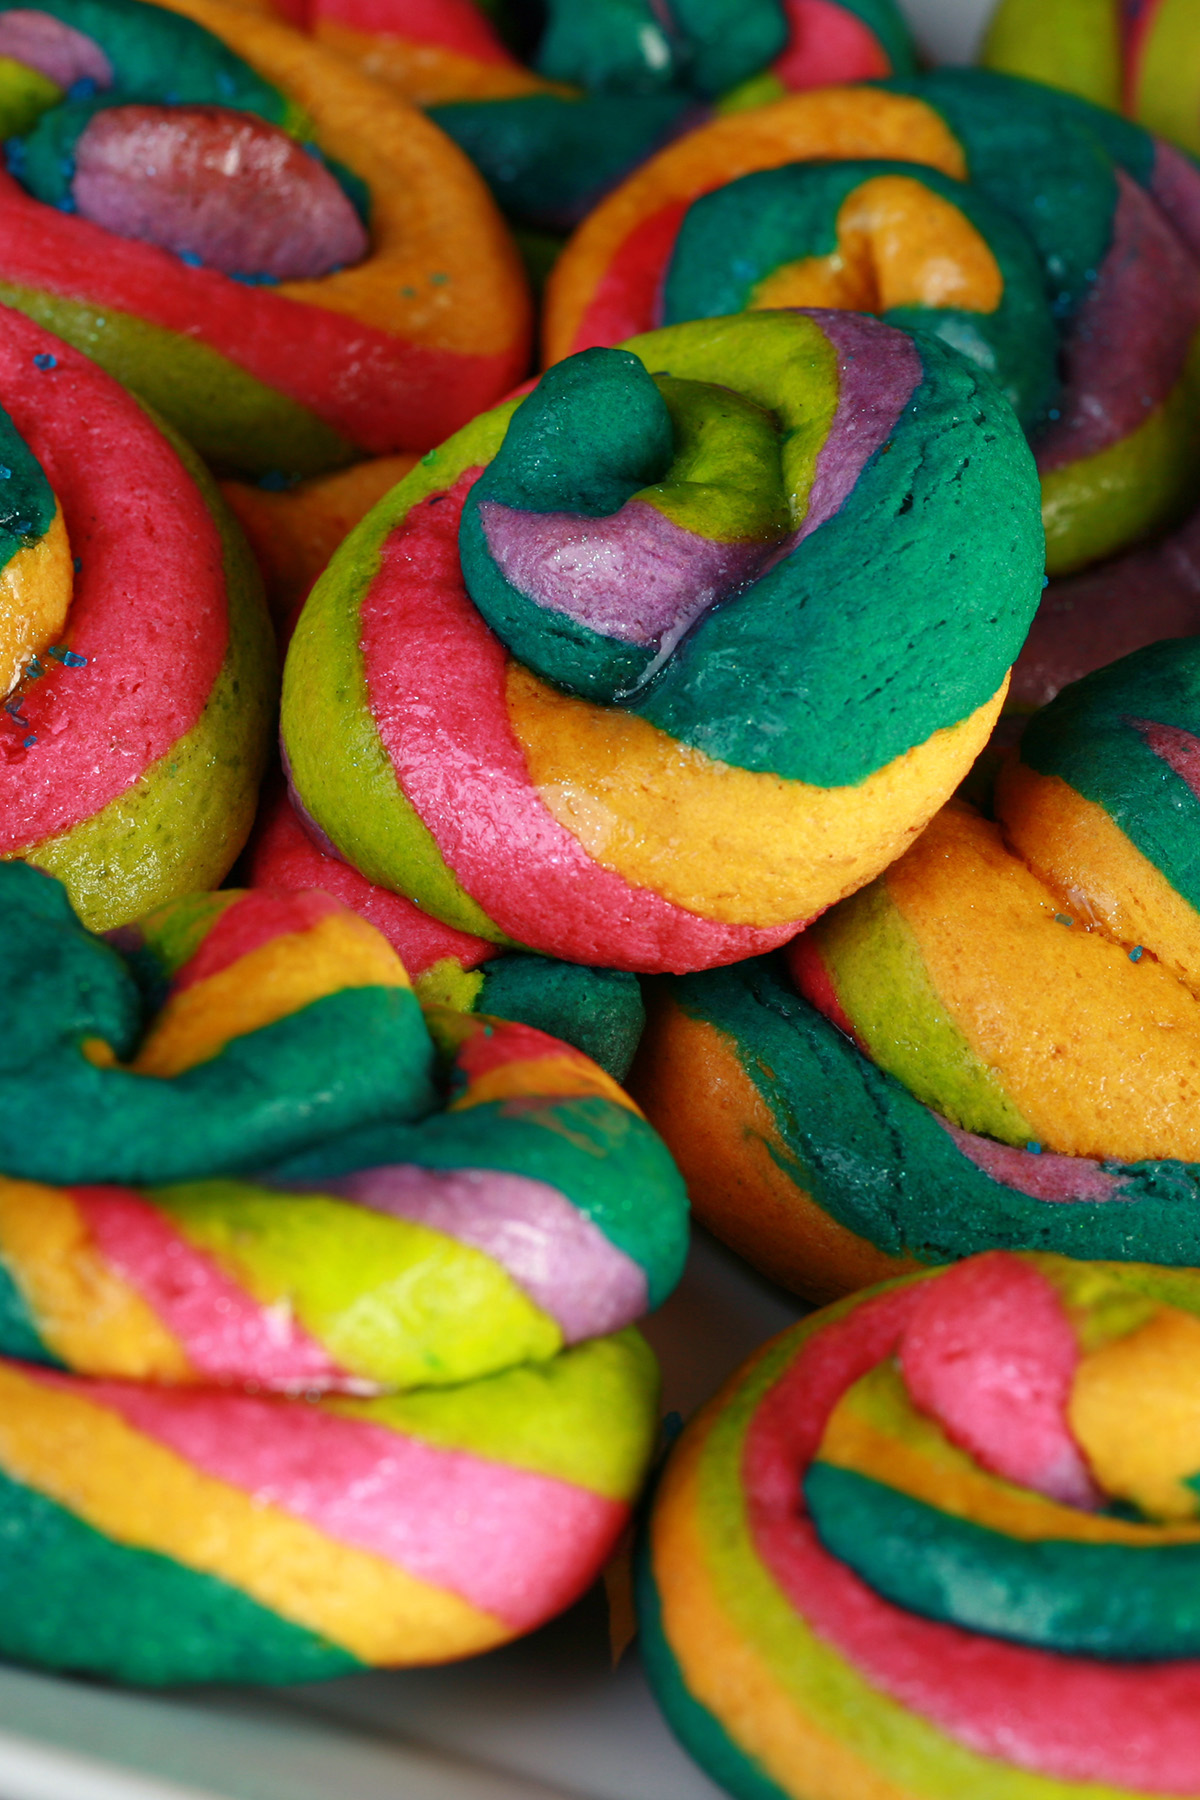 A close up view of a pile of gluten-free unicorn poop cookies.  They are brightly coloured cookie "poops" made from brightly coloured twists of cookie dough.